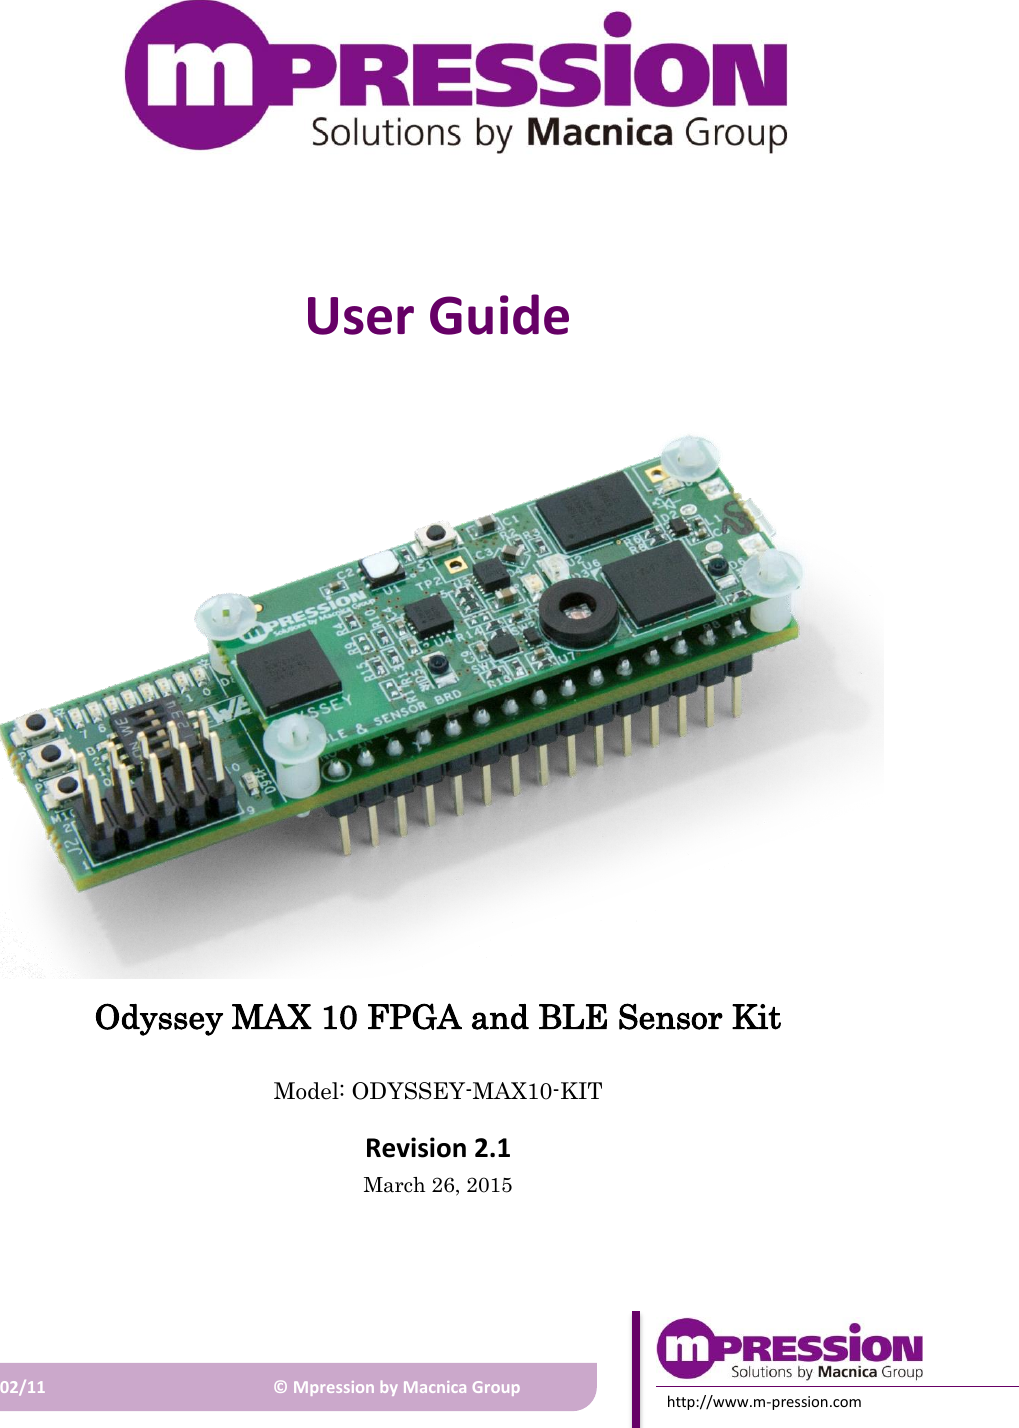   2015/02/11 © Mpression by Macnica Group http://www.m-pression.com  User Guide  Odyssey MAX 10 FPGA and BLE Sensor Kit Model: ODYSSEY-MAX10-KIT Revision 2.1 March 26, 2015      